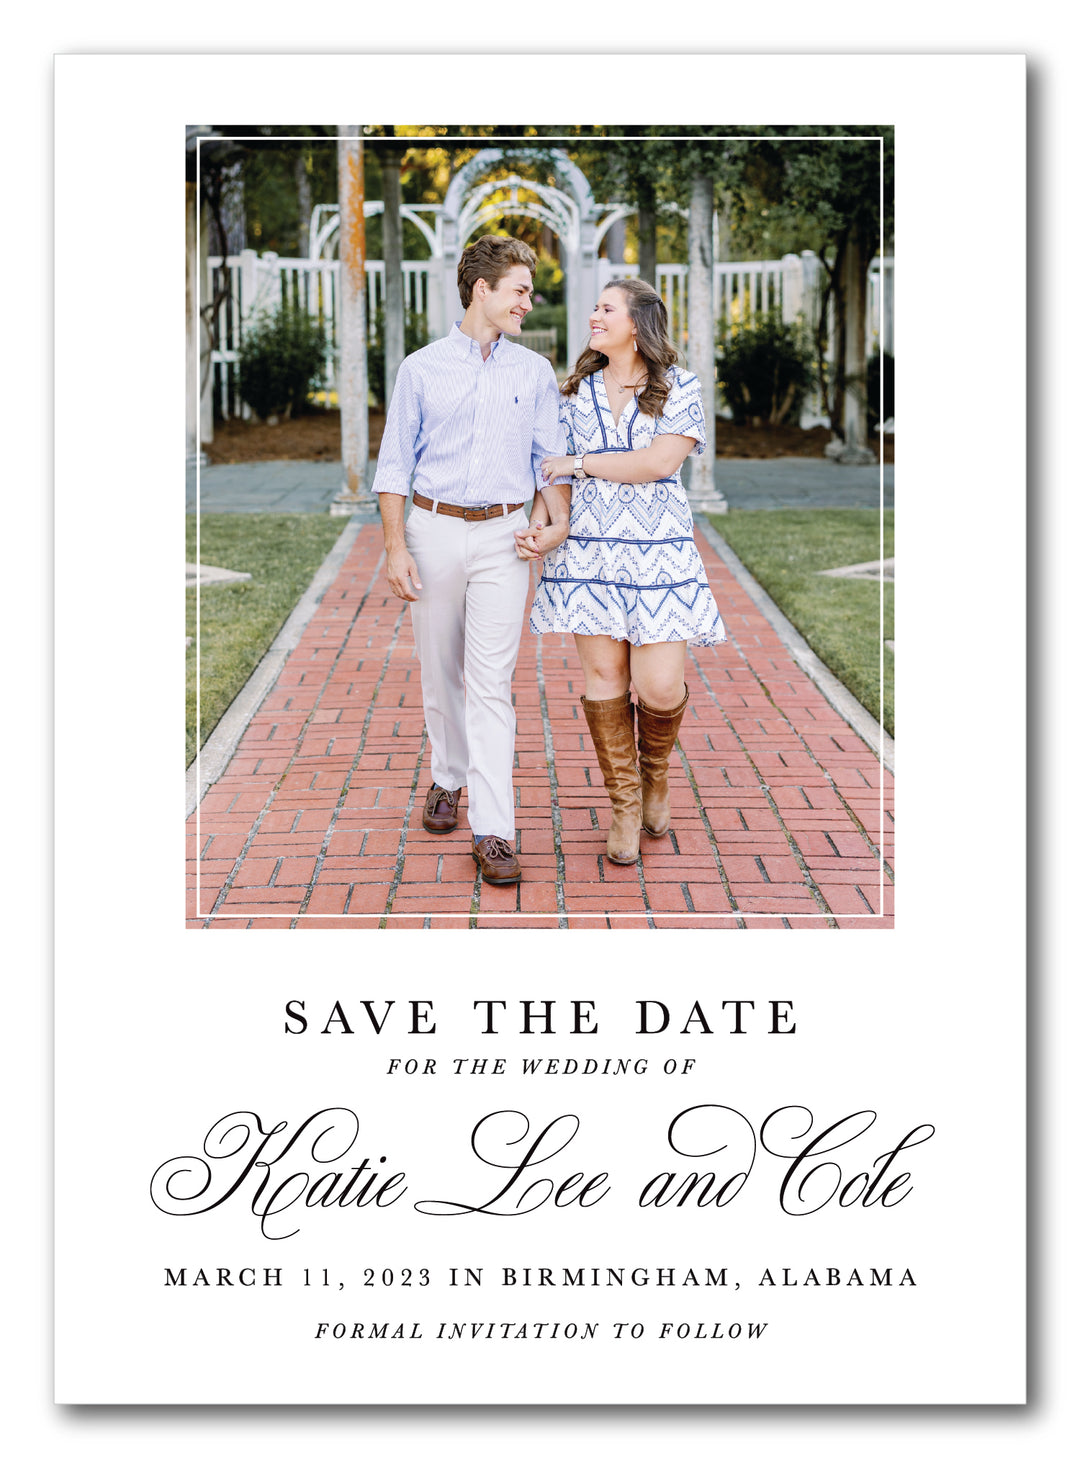 The Katie Lee Save The Date